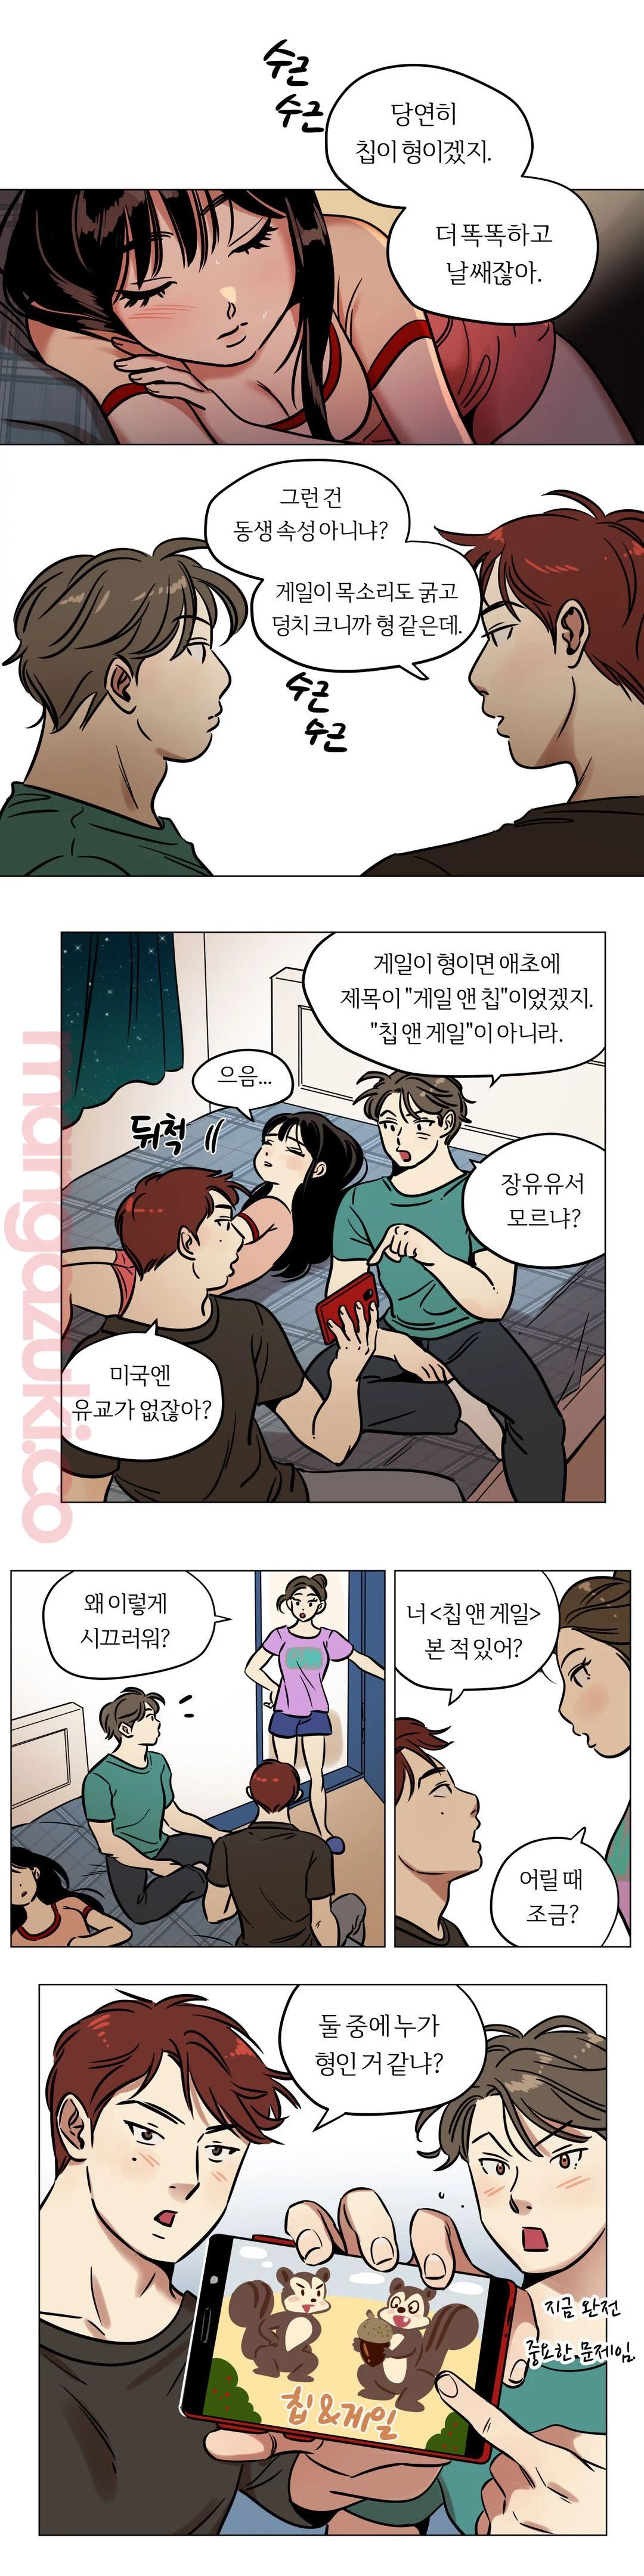 Snowman Raw - Chapter 21 Page 1